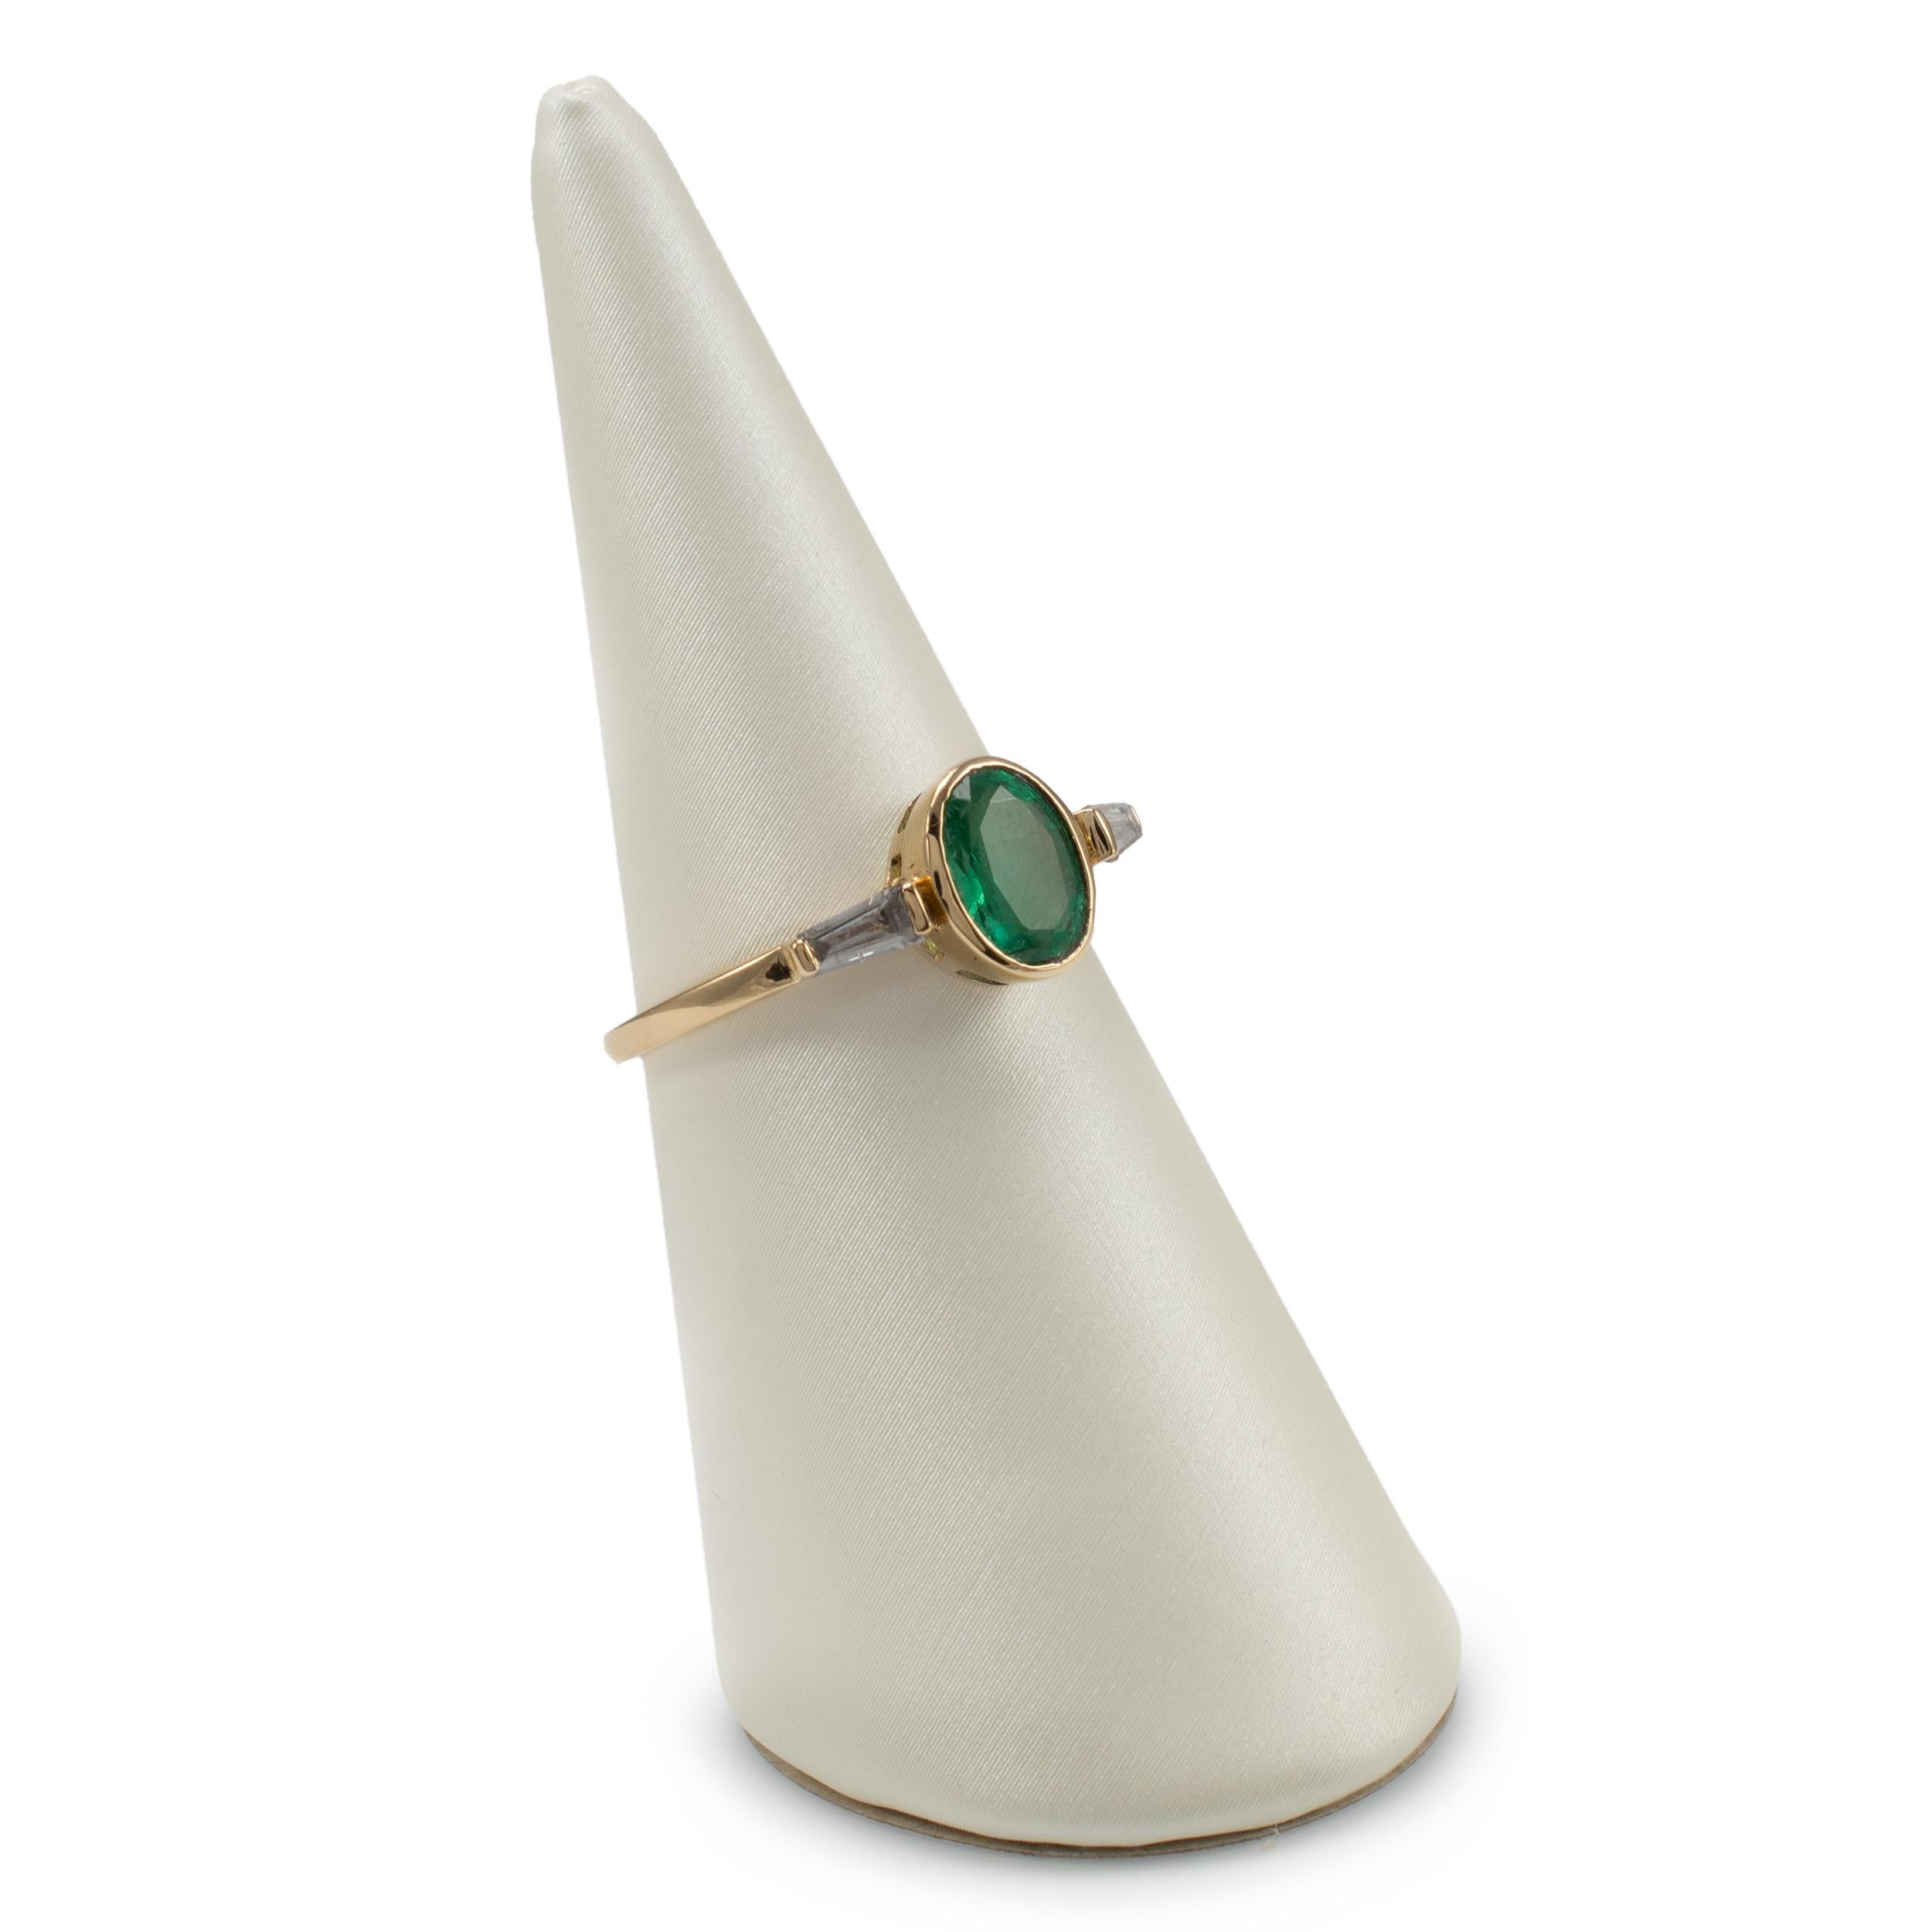 This gorgeous emerald and diamond dress ring is nicely crafted in 18 karat yellow gold. The bezel set oval cut emerald is complemented by tapered baguette diamonds set on each shoulder.

Ring Size: UK/AU size N  US size 7  EU size 54

Emerald with